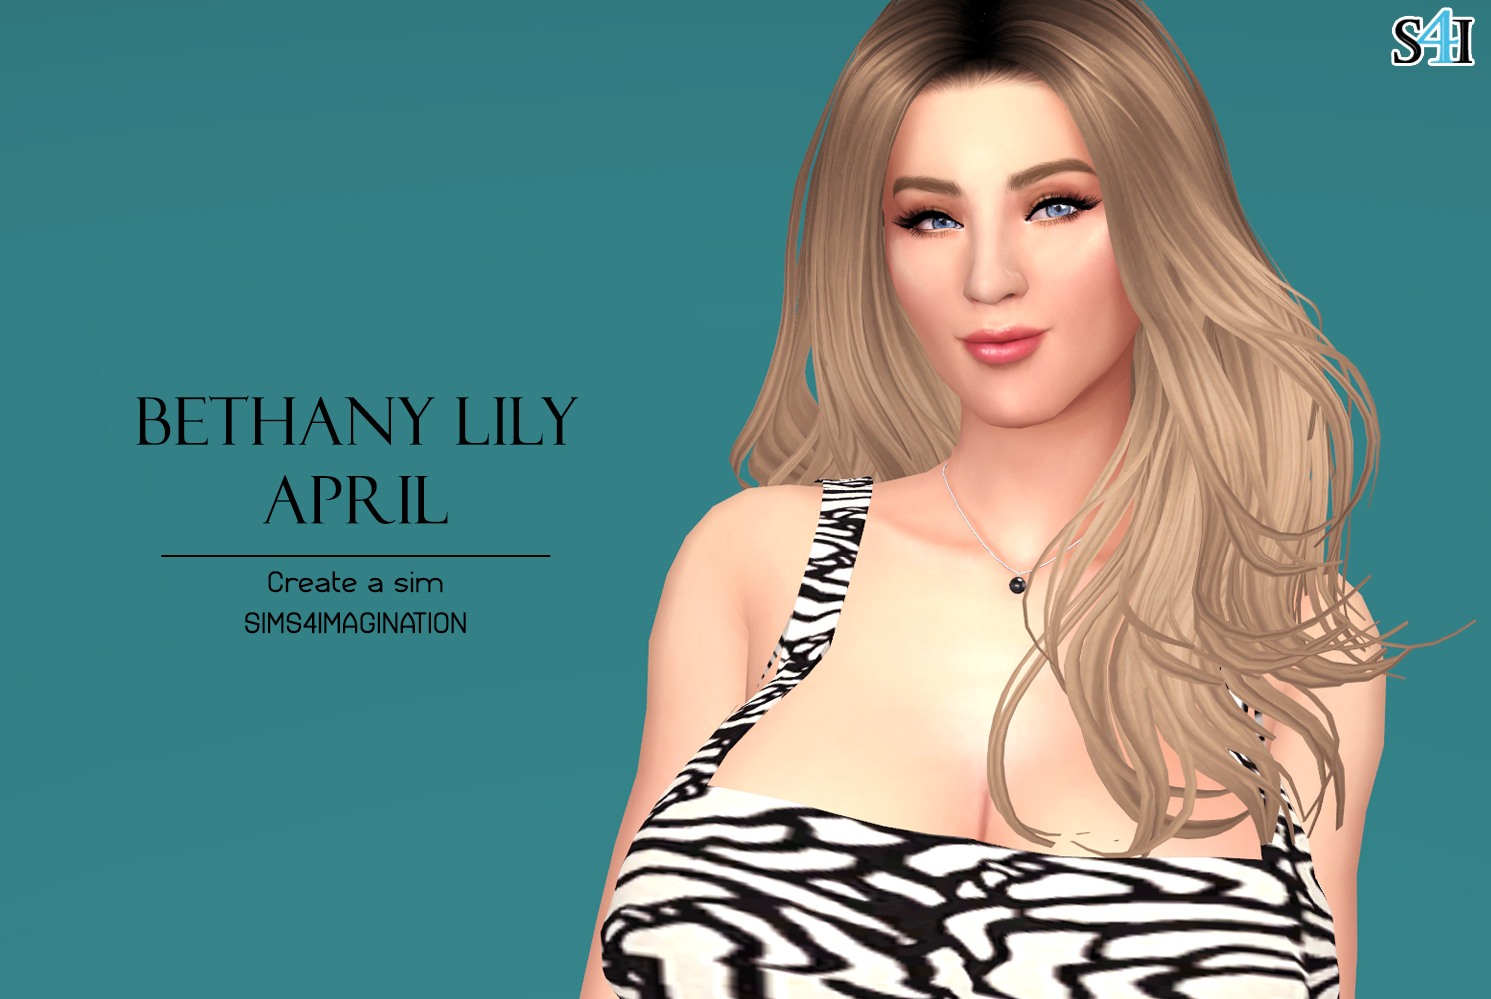 Instagram lily april Discover beth